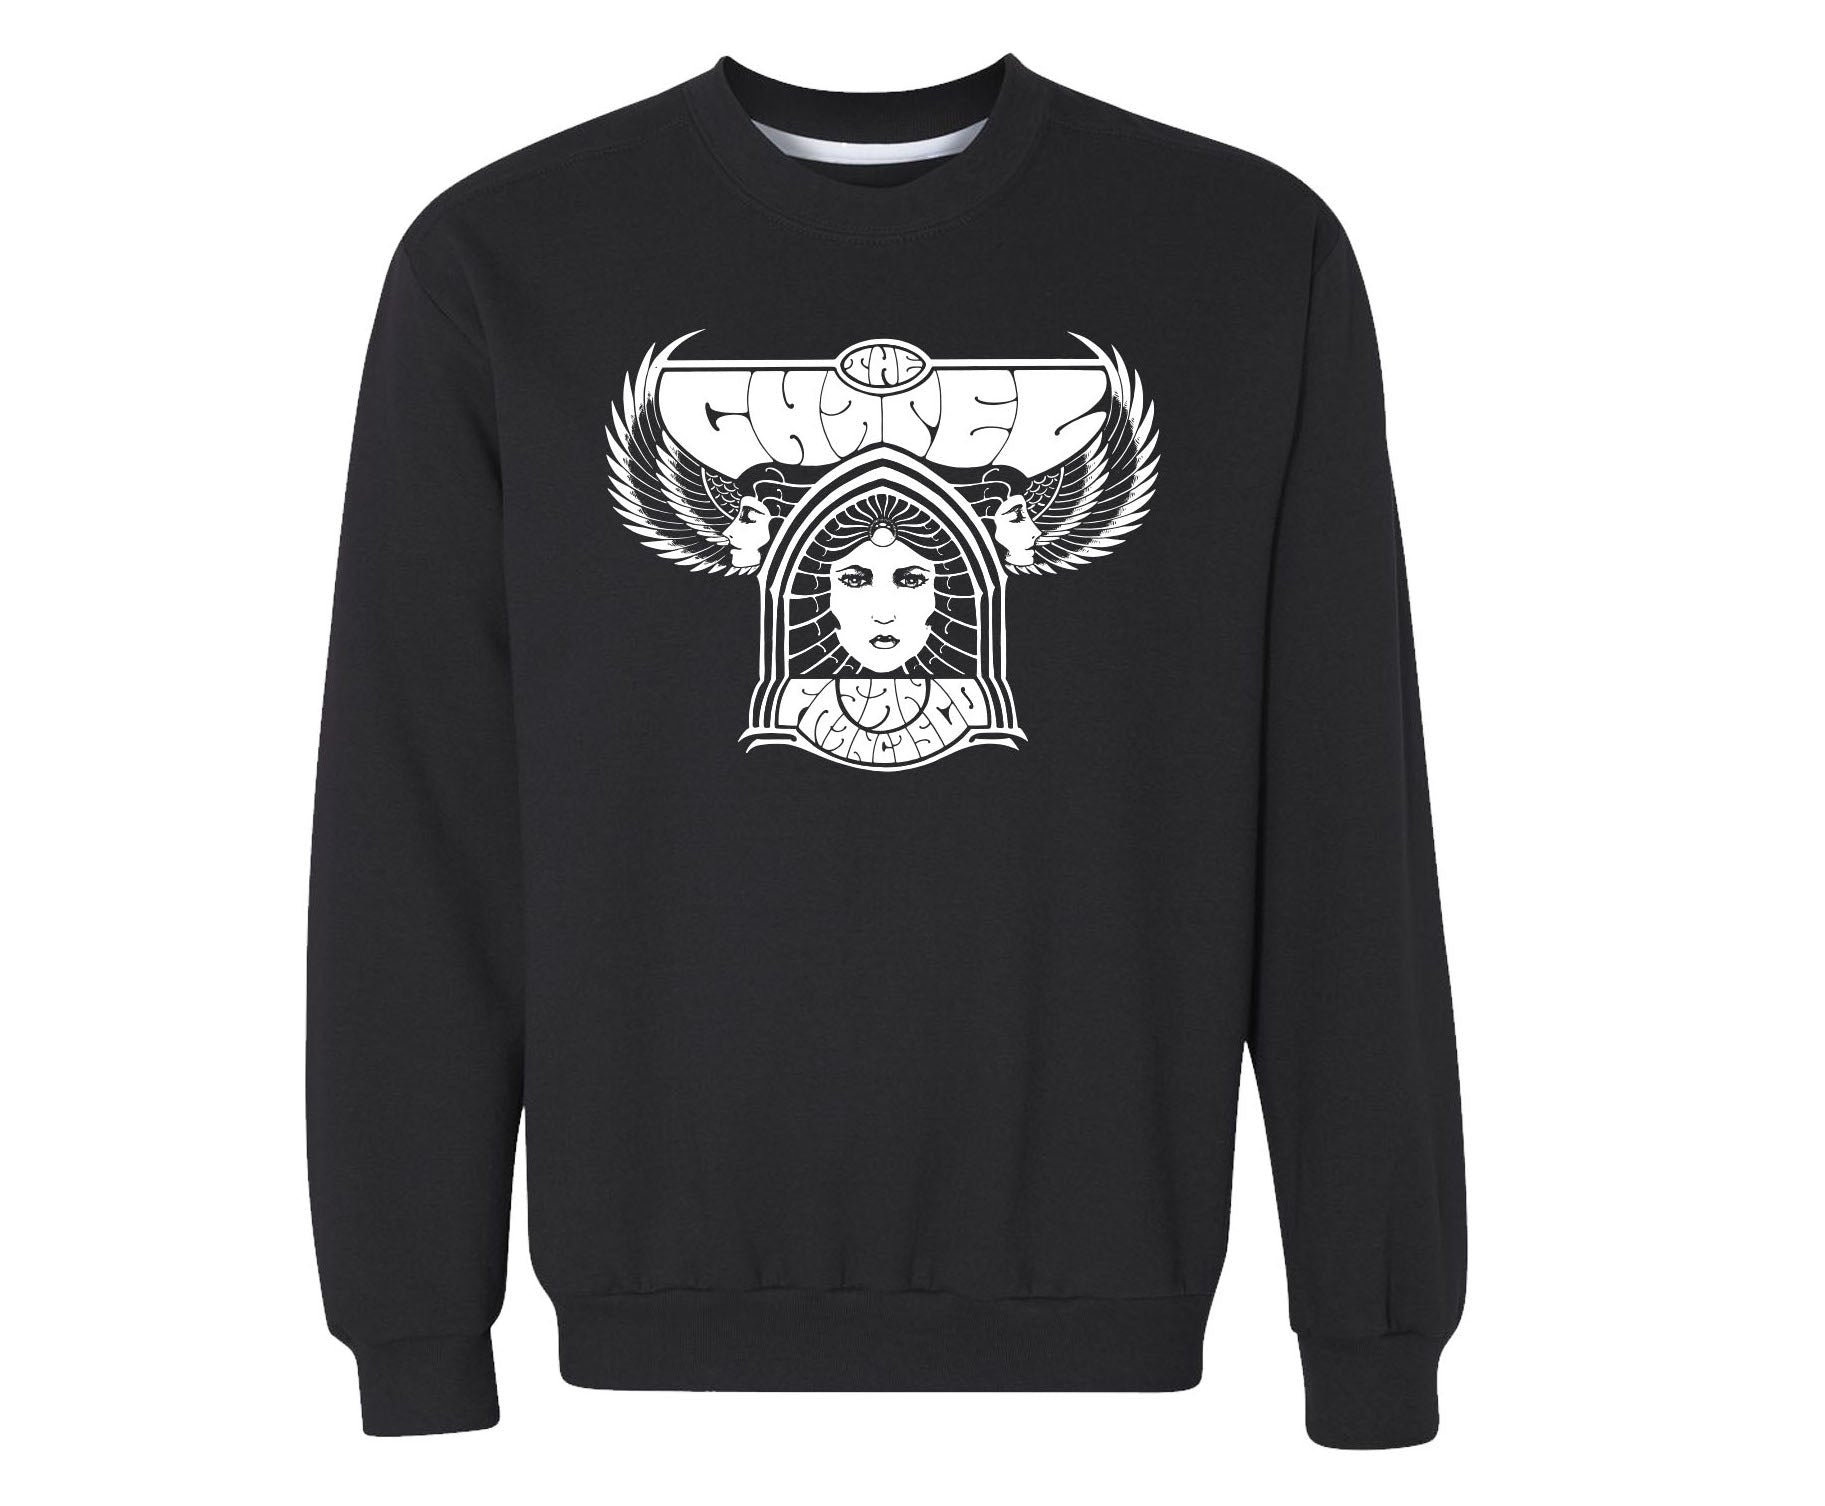 Crewneck Sweater - Designed by Alan Forbes